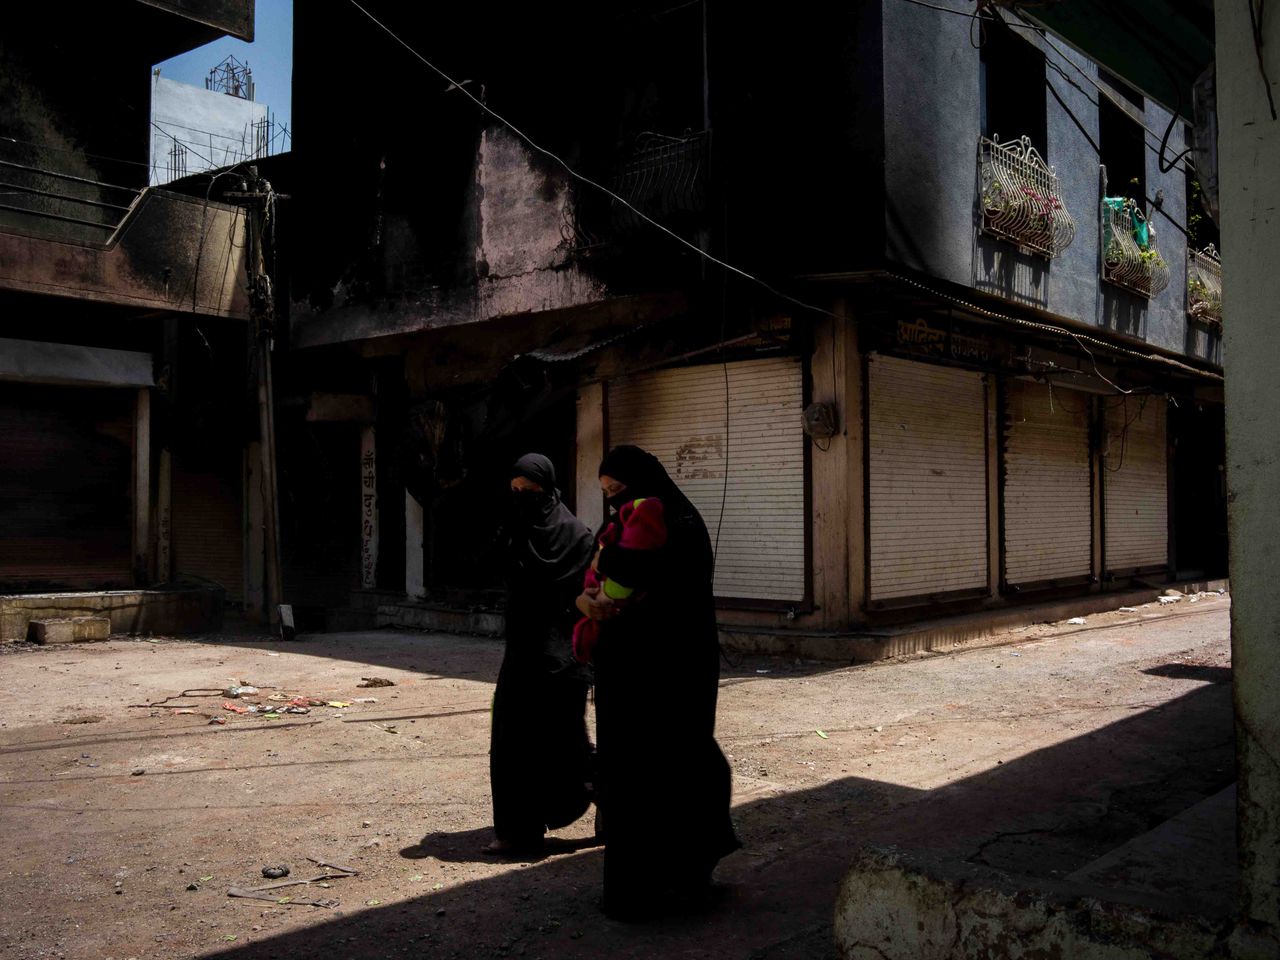 Muslim women walk past the wreckage of a house that was set alight by a mob amid communal violence in Khargone, India, on April 15, 2022. As a national campaign by right-wing groups inflames local tensions, Muslim communities are facing the harshest punishments, according to activists, analysts and retired officials.